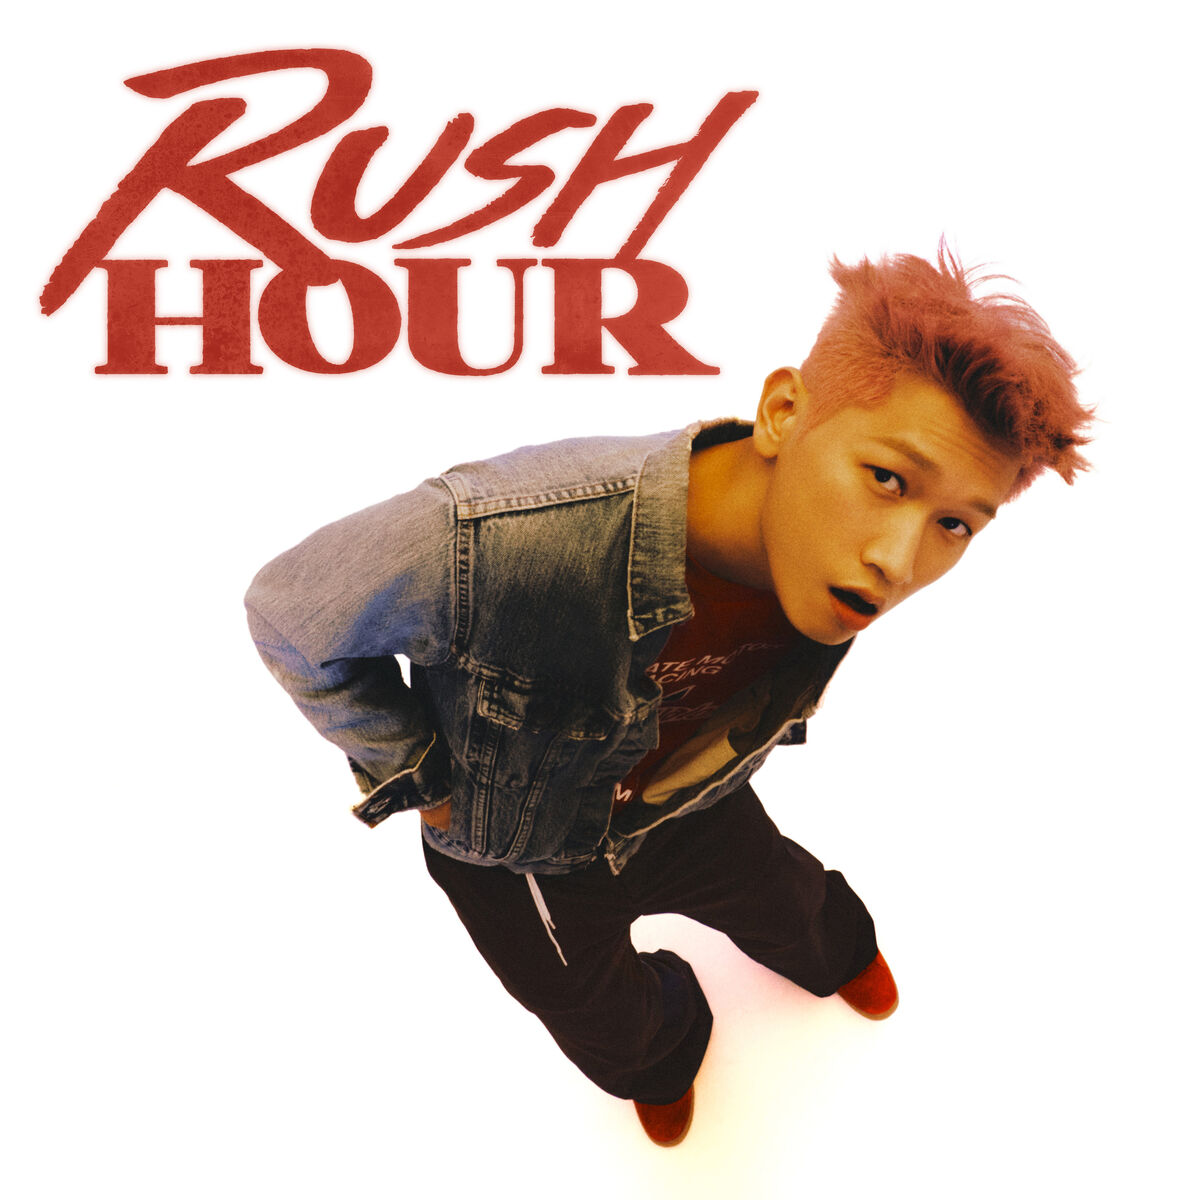 Rush Hour (Feat. j-hope of BTS)' Photo Sketch